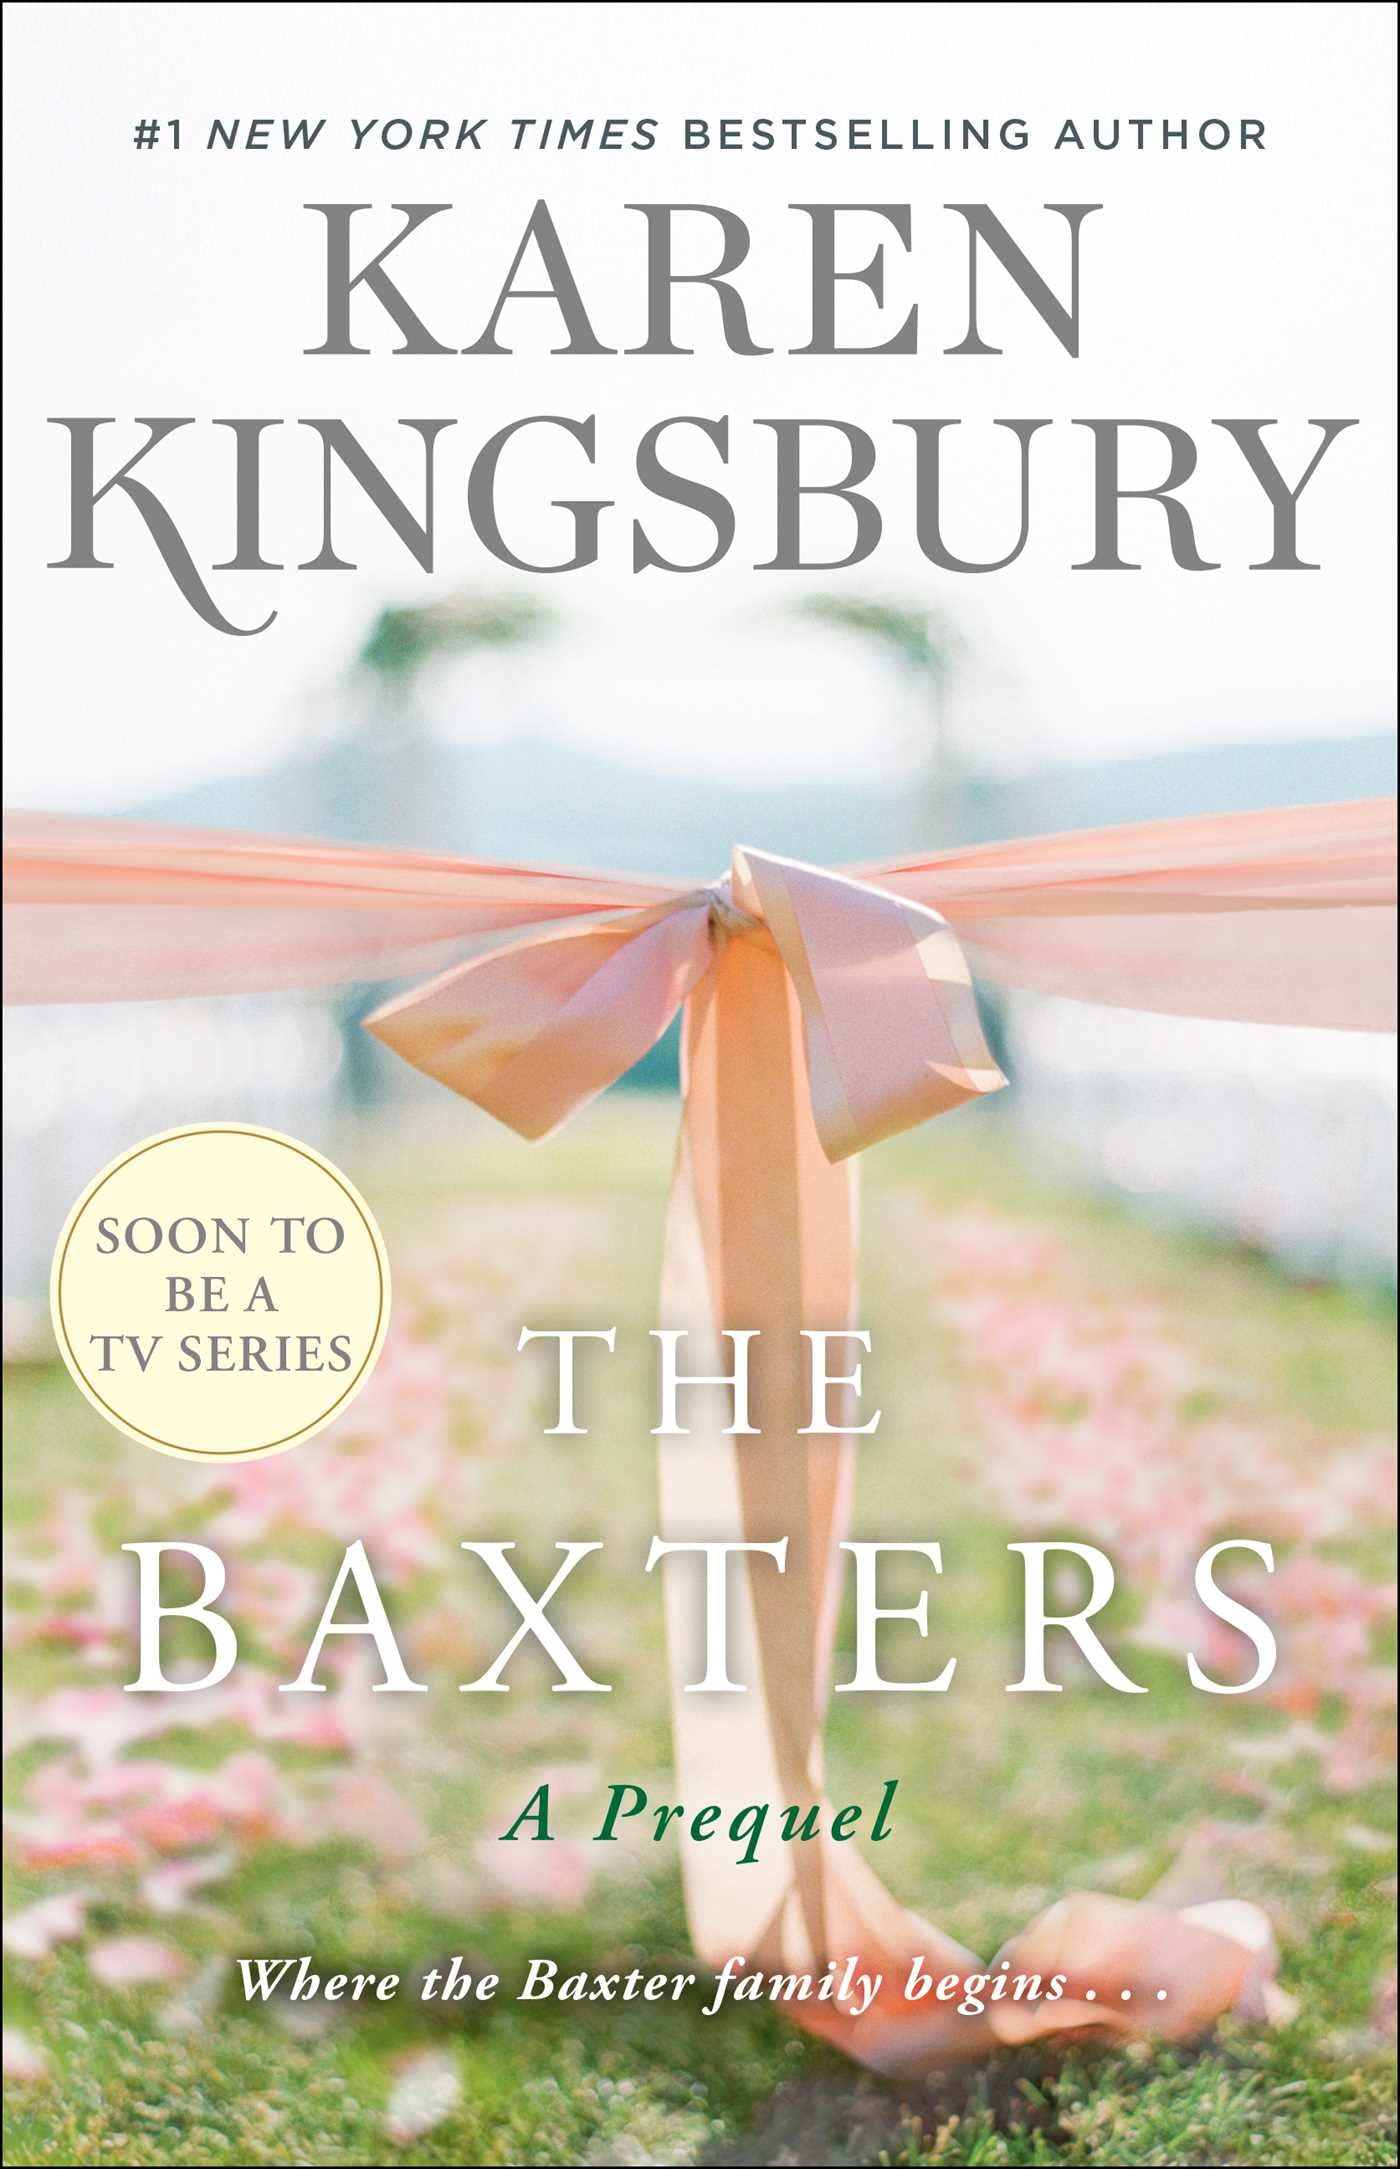 Image for "The Baxters"